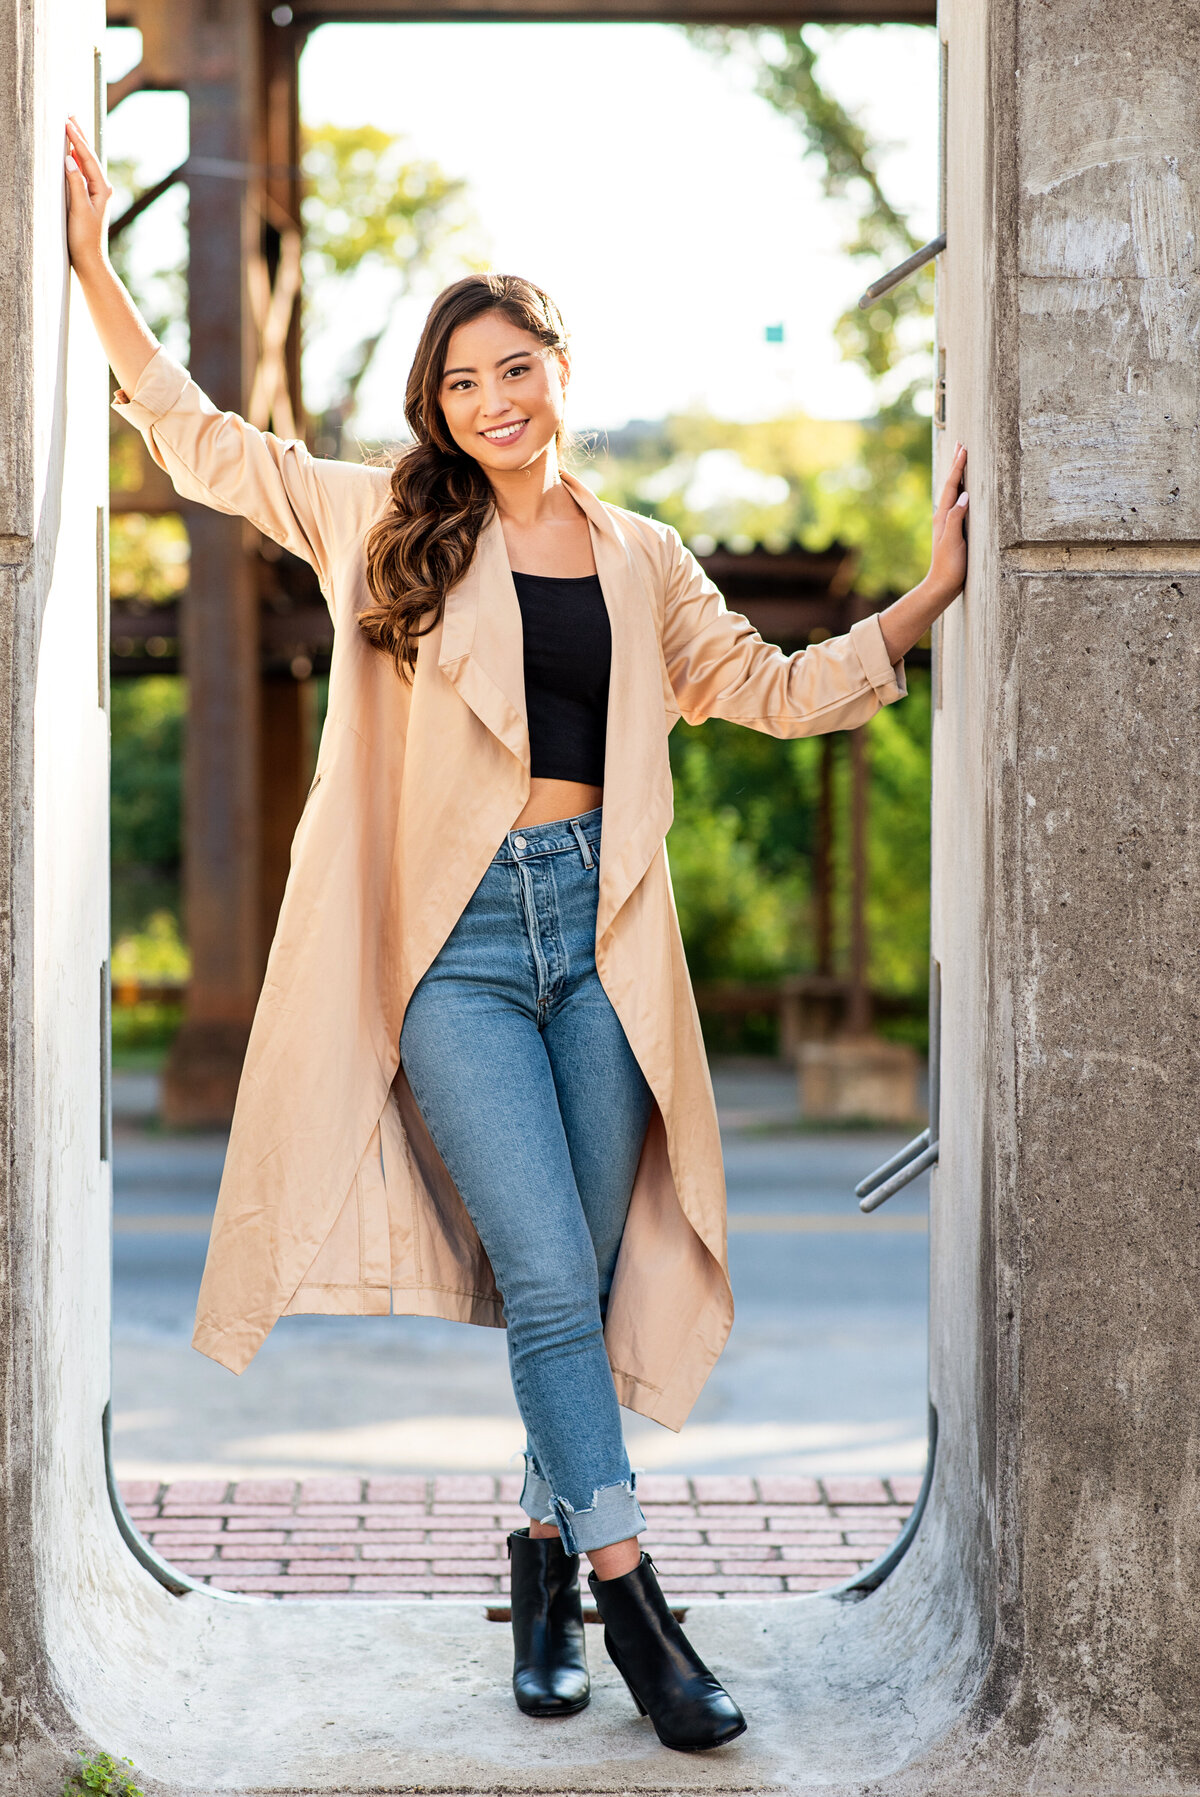 Senior girl poses in Floodwall opening Richmond, VA wearing trench coat and jeans.